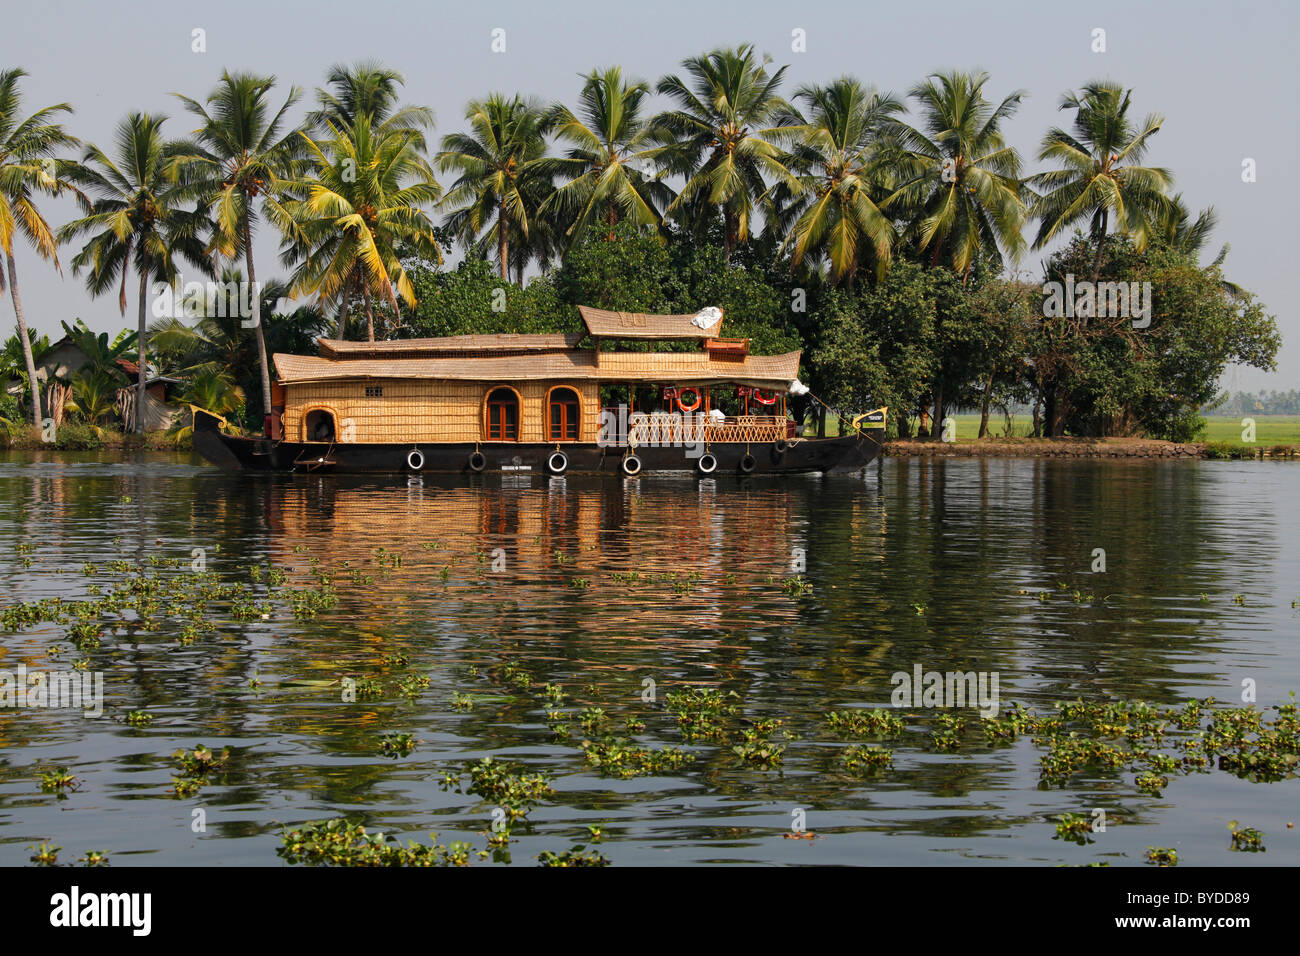 Luxury houseboat on a canal in front of palm trees, Haripad, Alappuzha, Alleppey, Kerala, India, Asia Stock Photo